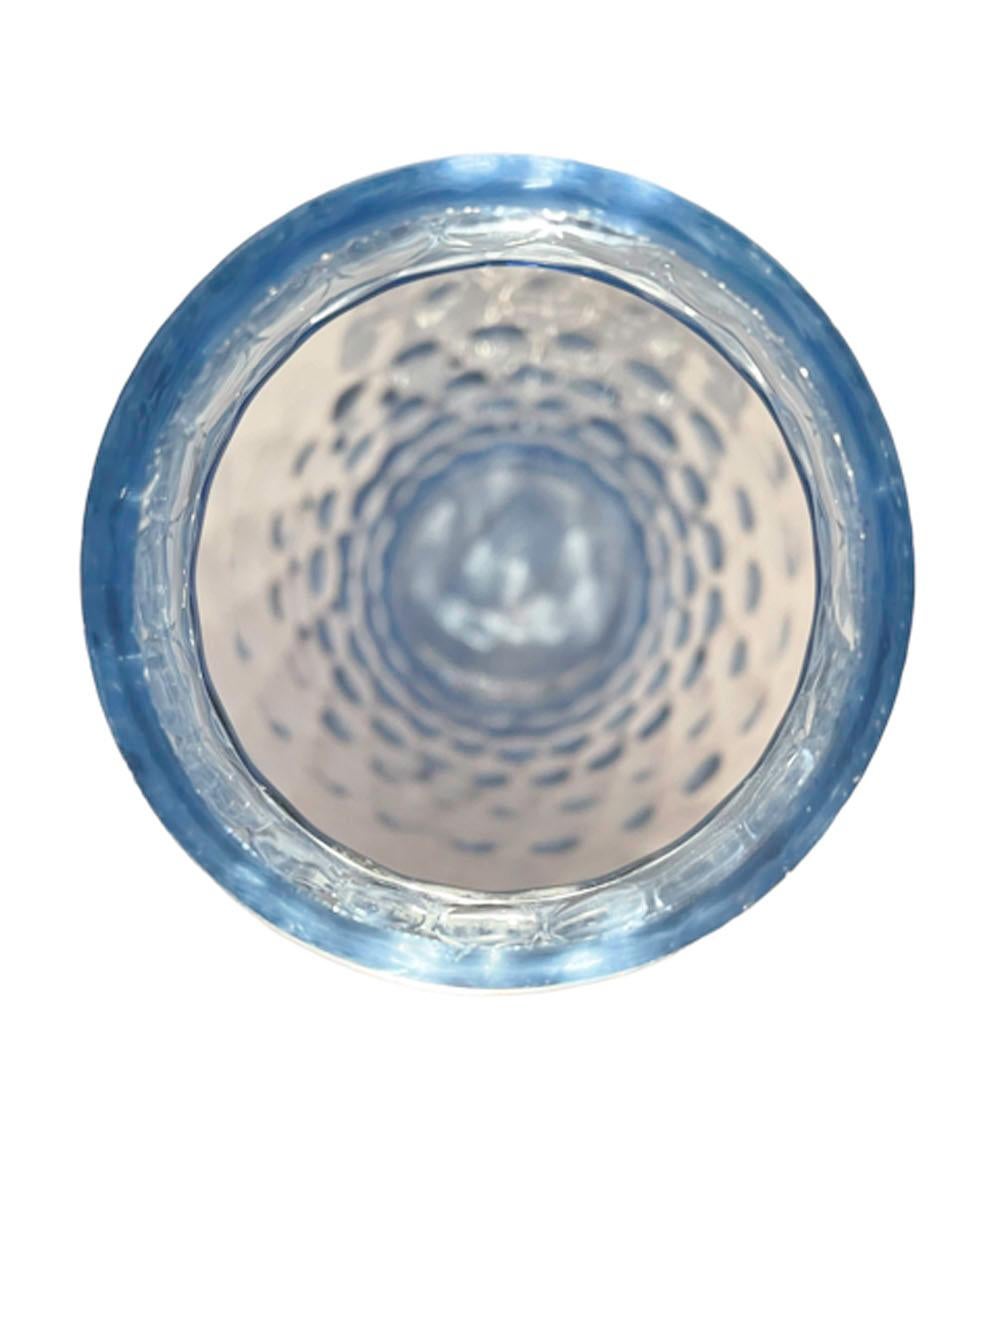 Art Deco Molded Blue Glass Cocktail Shaker with All-Over Thumbprint Pattern In Good Condition For Sale In Nantucket, MA